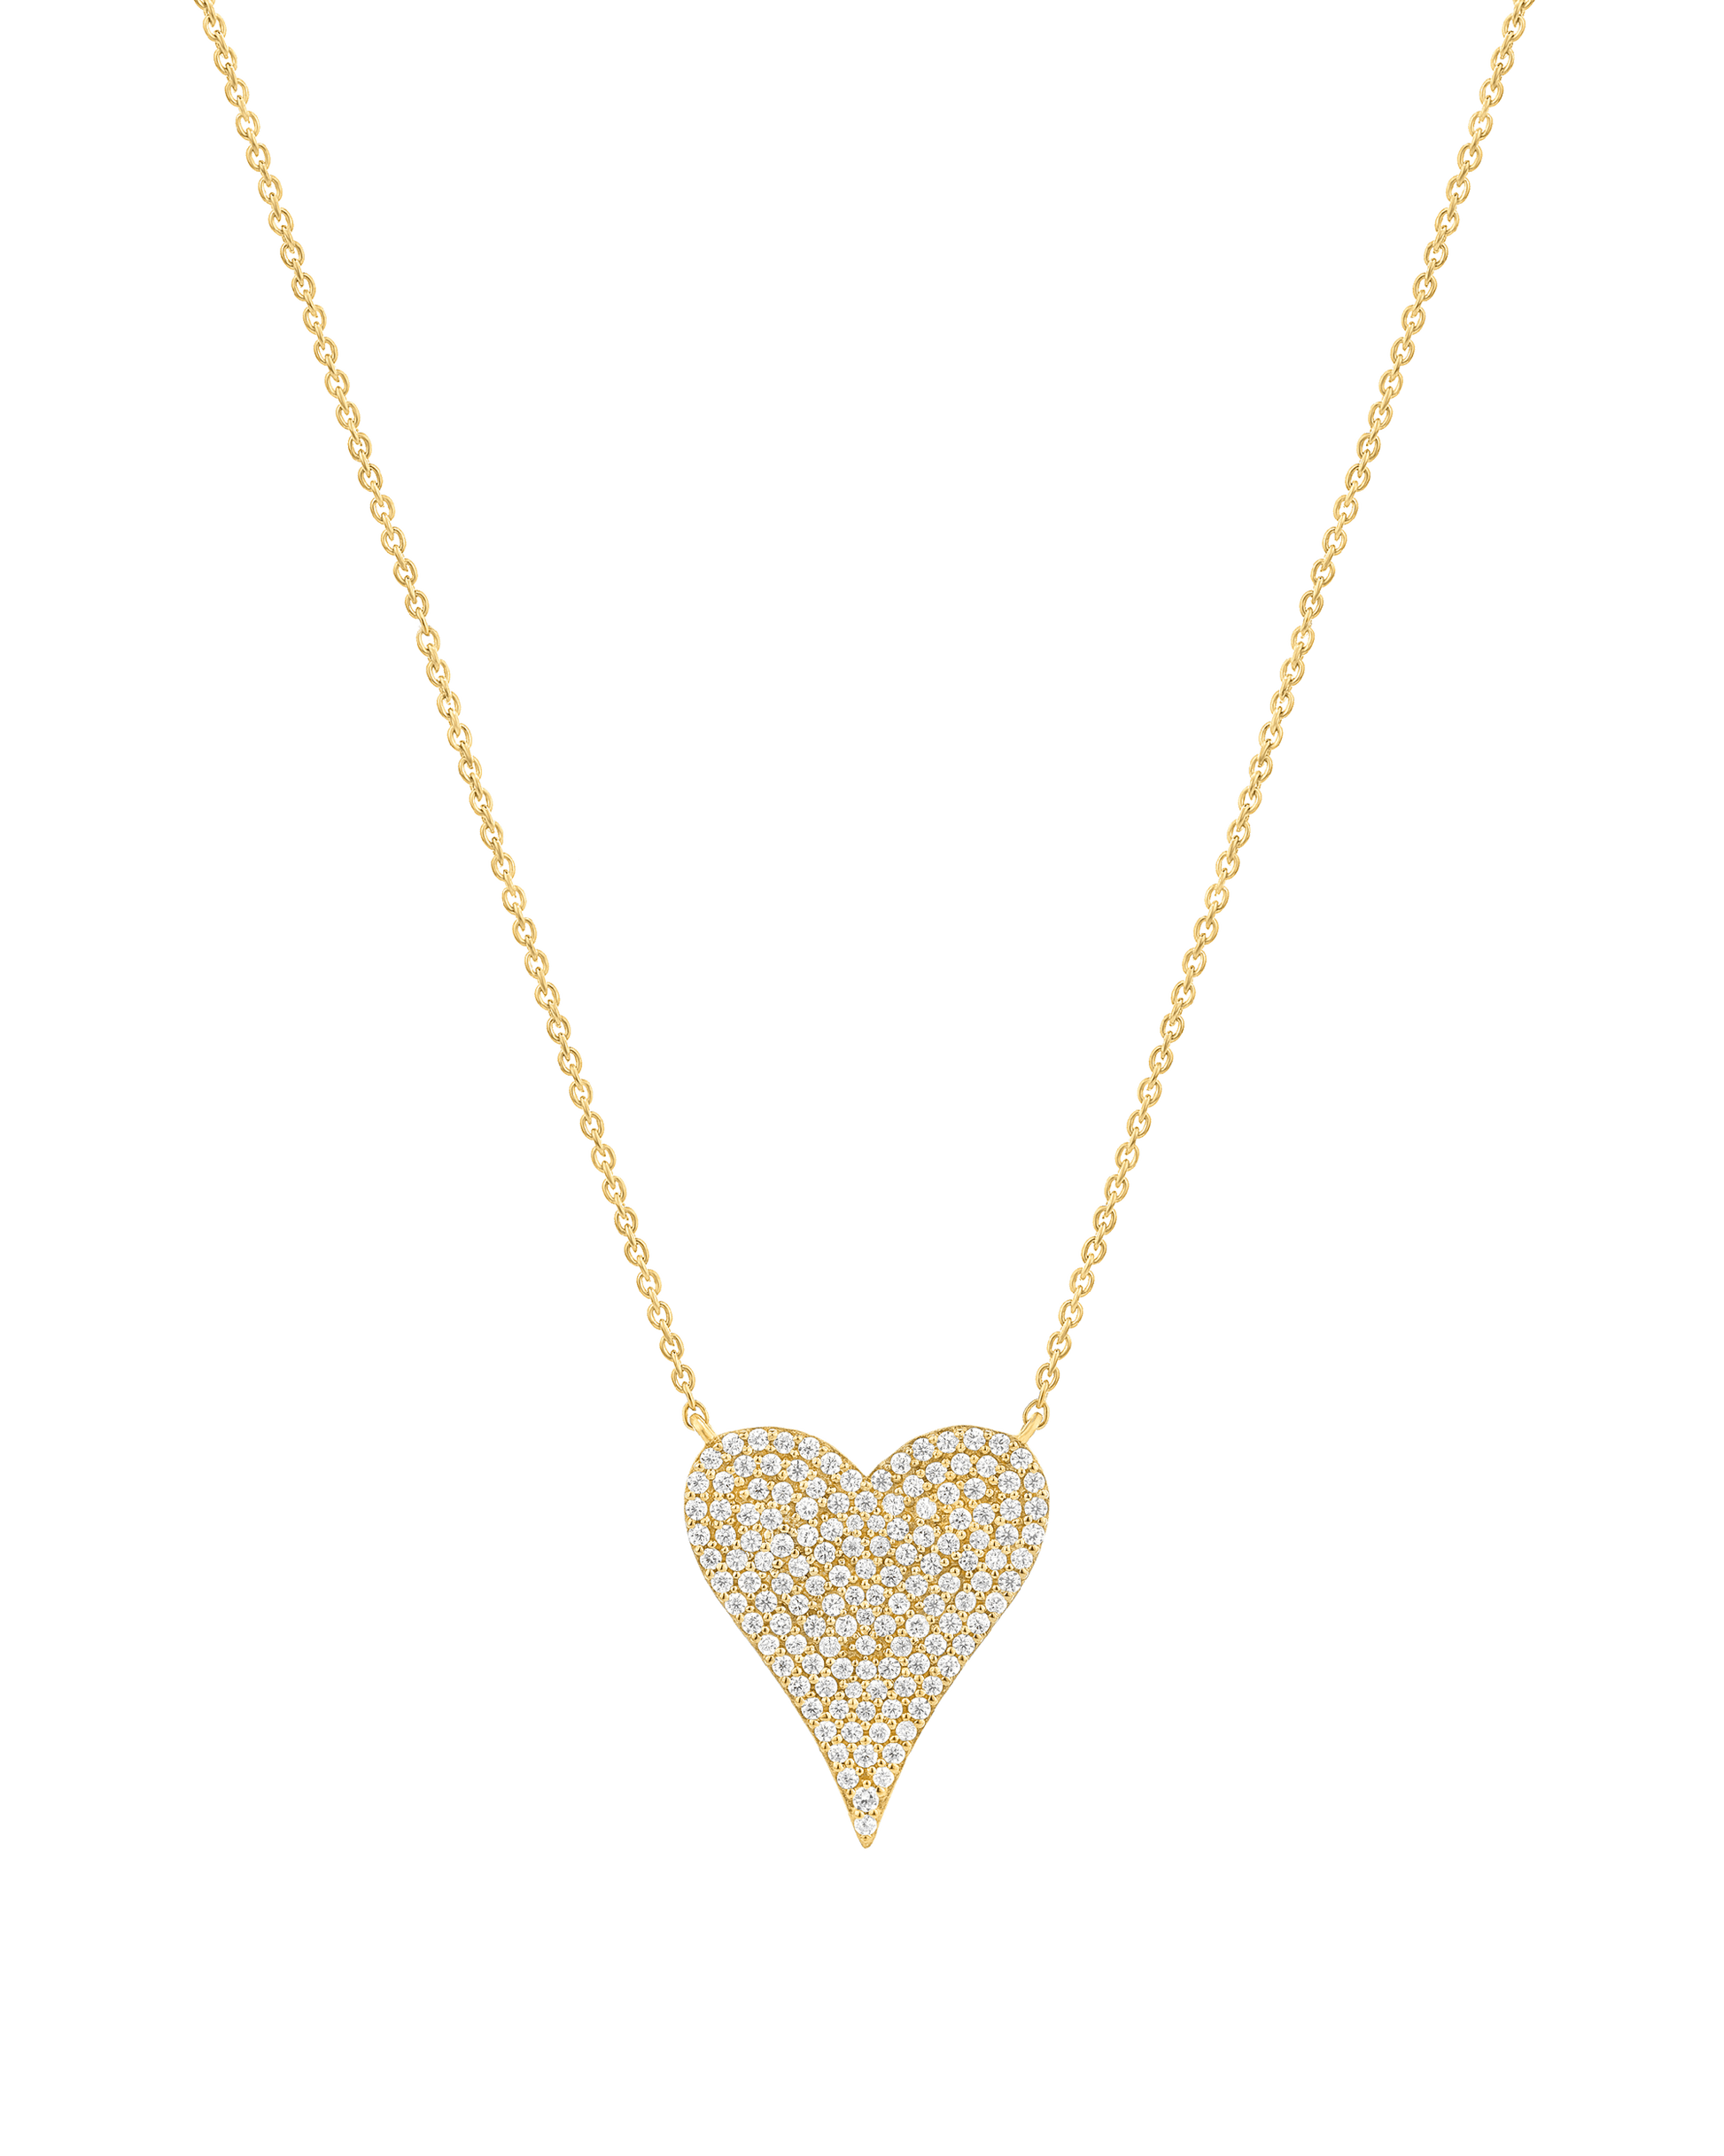 Large Diamond Paved Heart Necklace - 14K Yellow Gold Necklaces magal-dev 